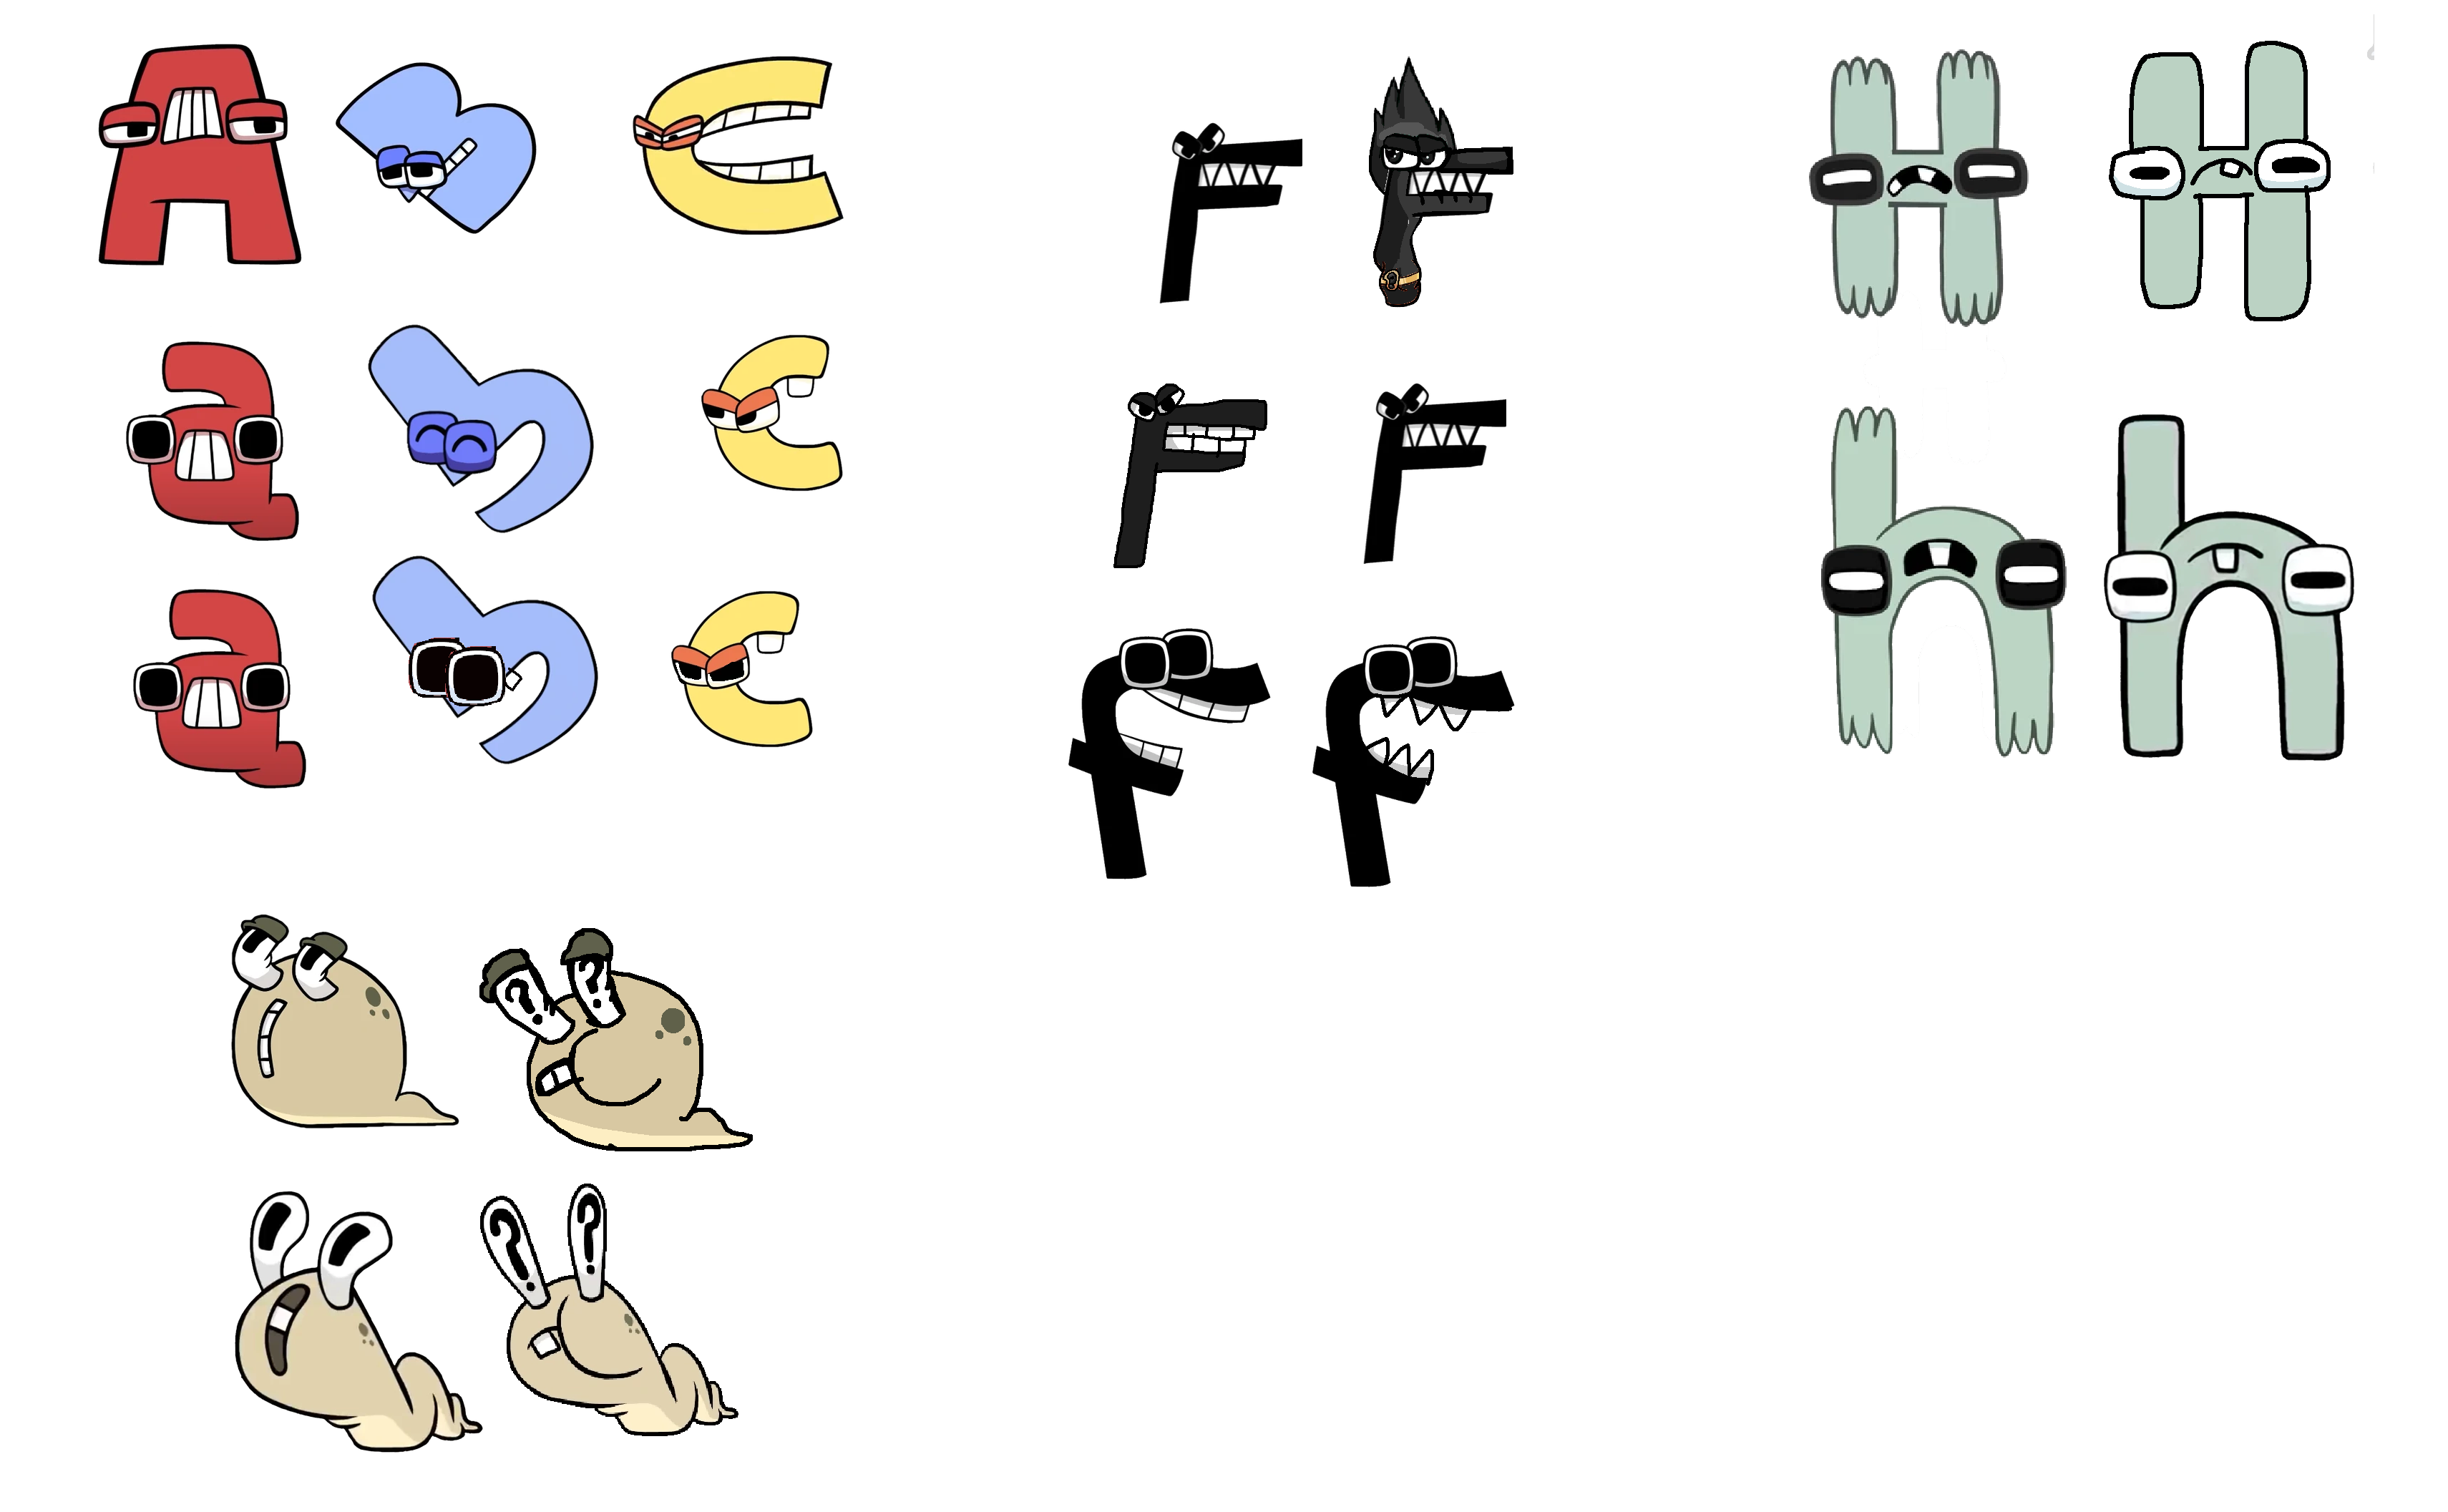 Alphabet Lore - The 'ABC' but I modified by Abbysek on DeviantArt